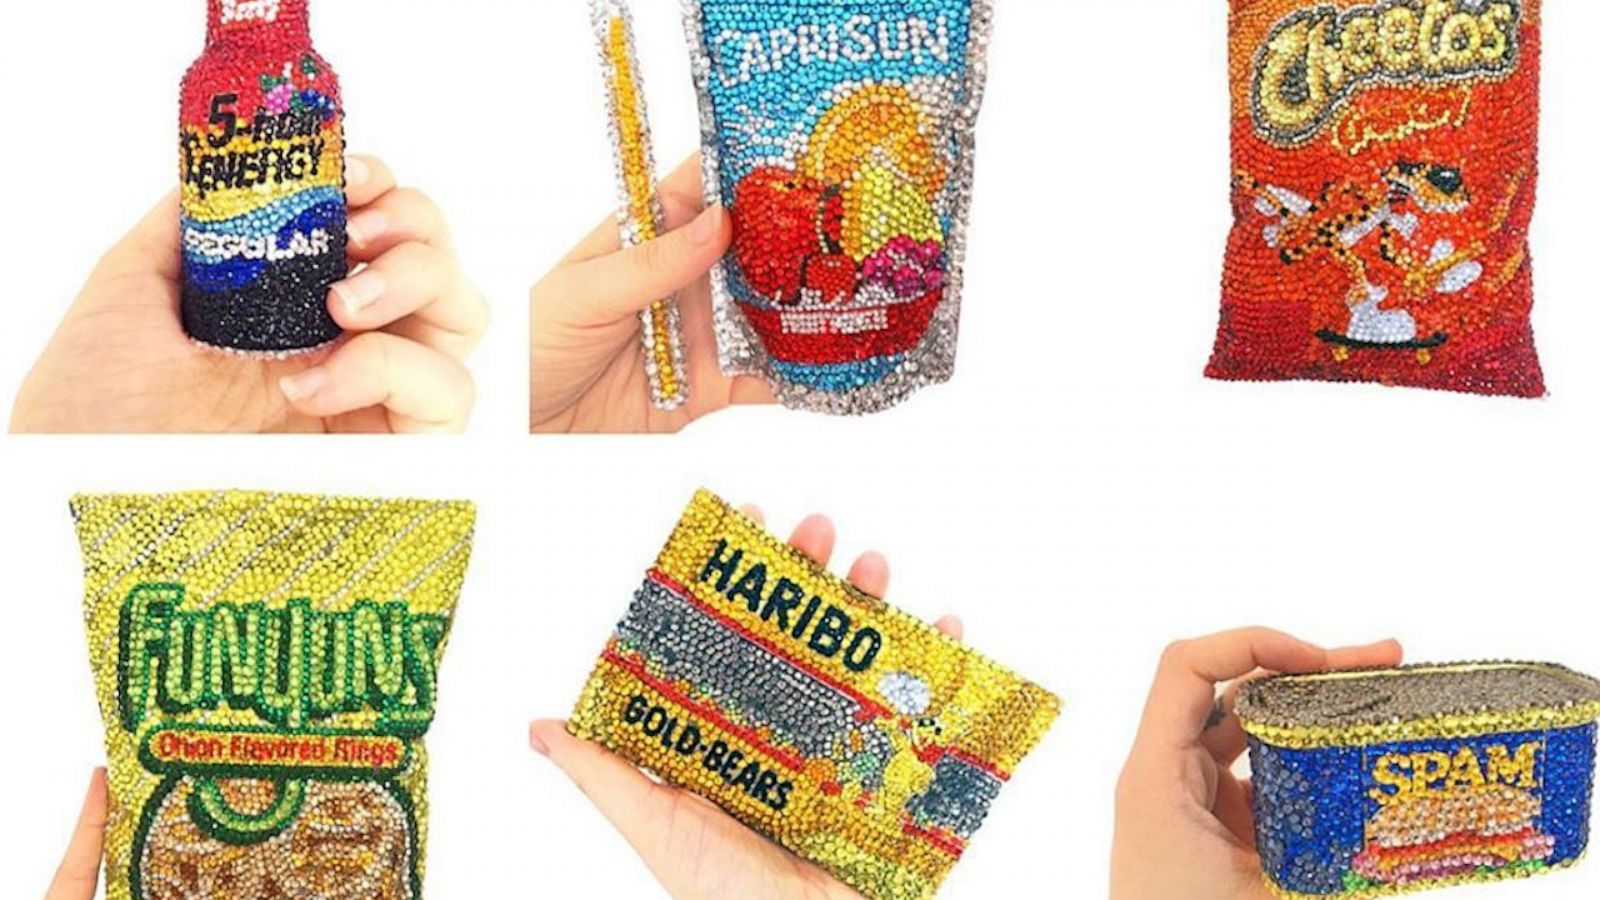 A Woman Is Turning Popular Snacks Into Bedazzled Art